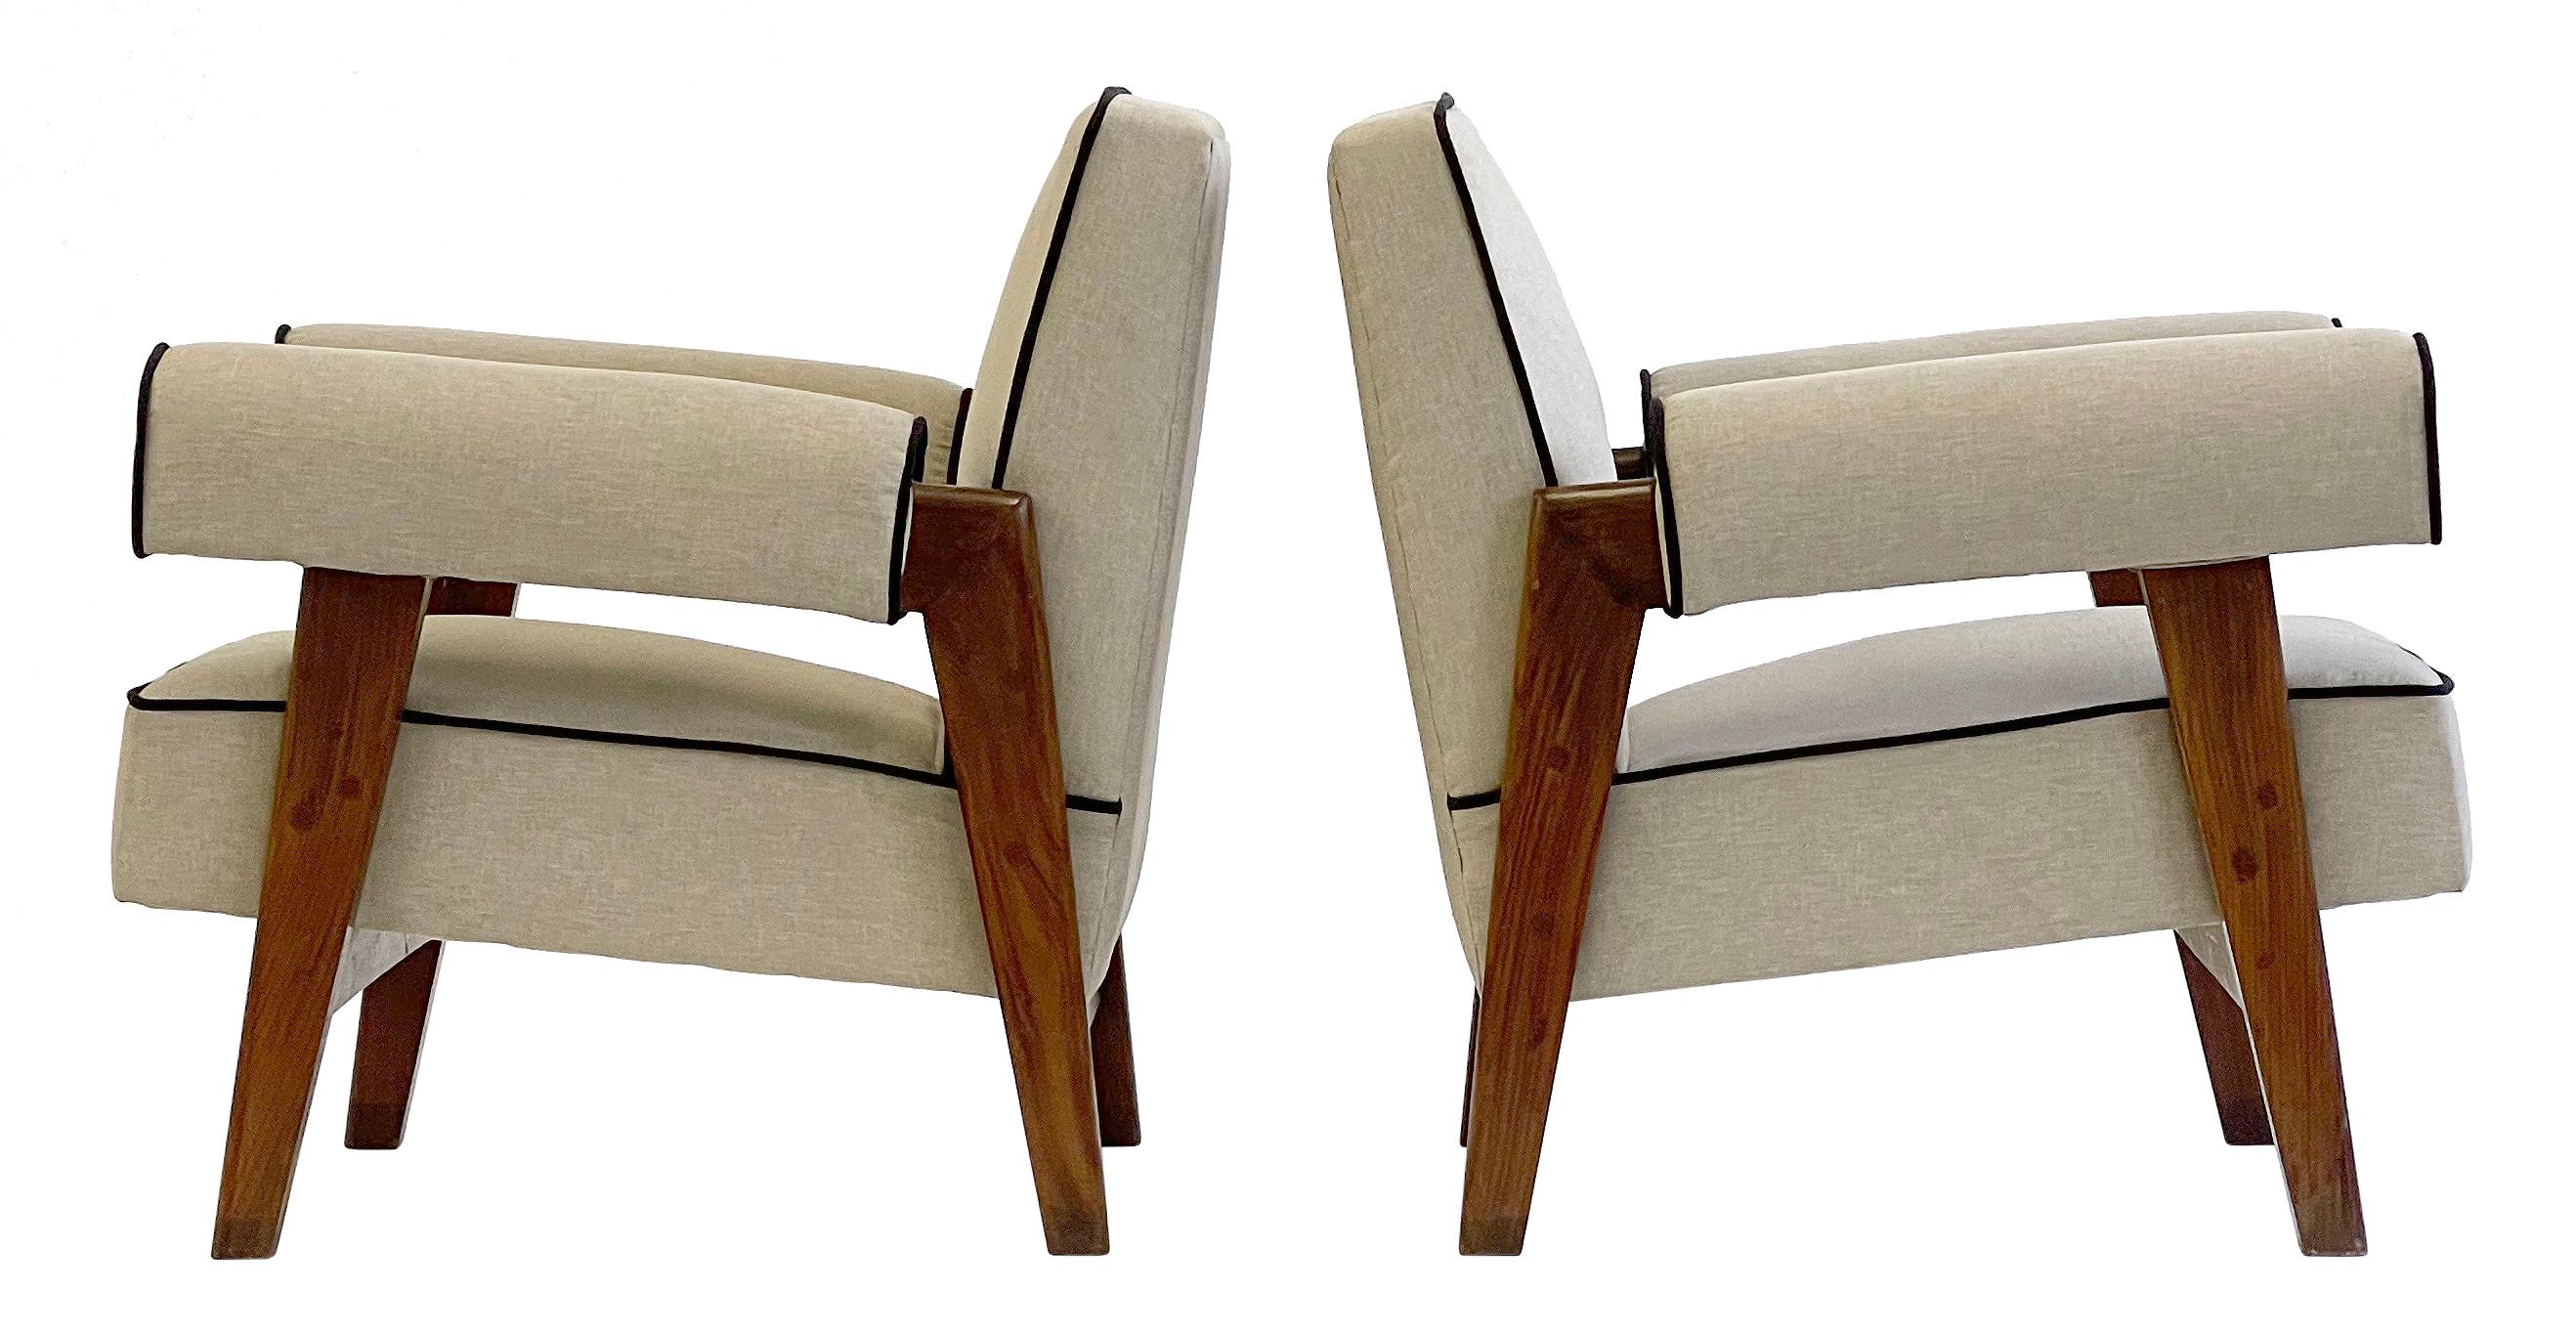 An important pair of upholstered lounge chairs in solid teak. A rare authentic vintage pair of lounge chairs designed by Le Corbusier and Pierre Jeanneret, circa 1955.

These chairs are having fresh upholstery in a light linen with darker piping.